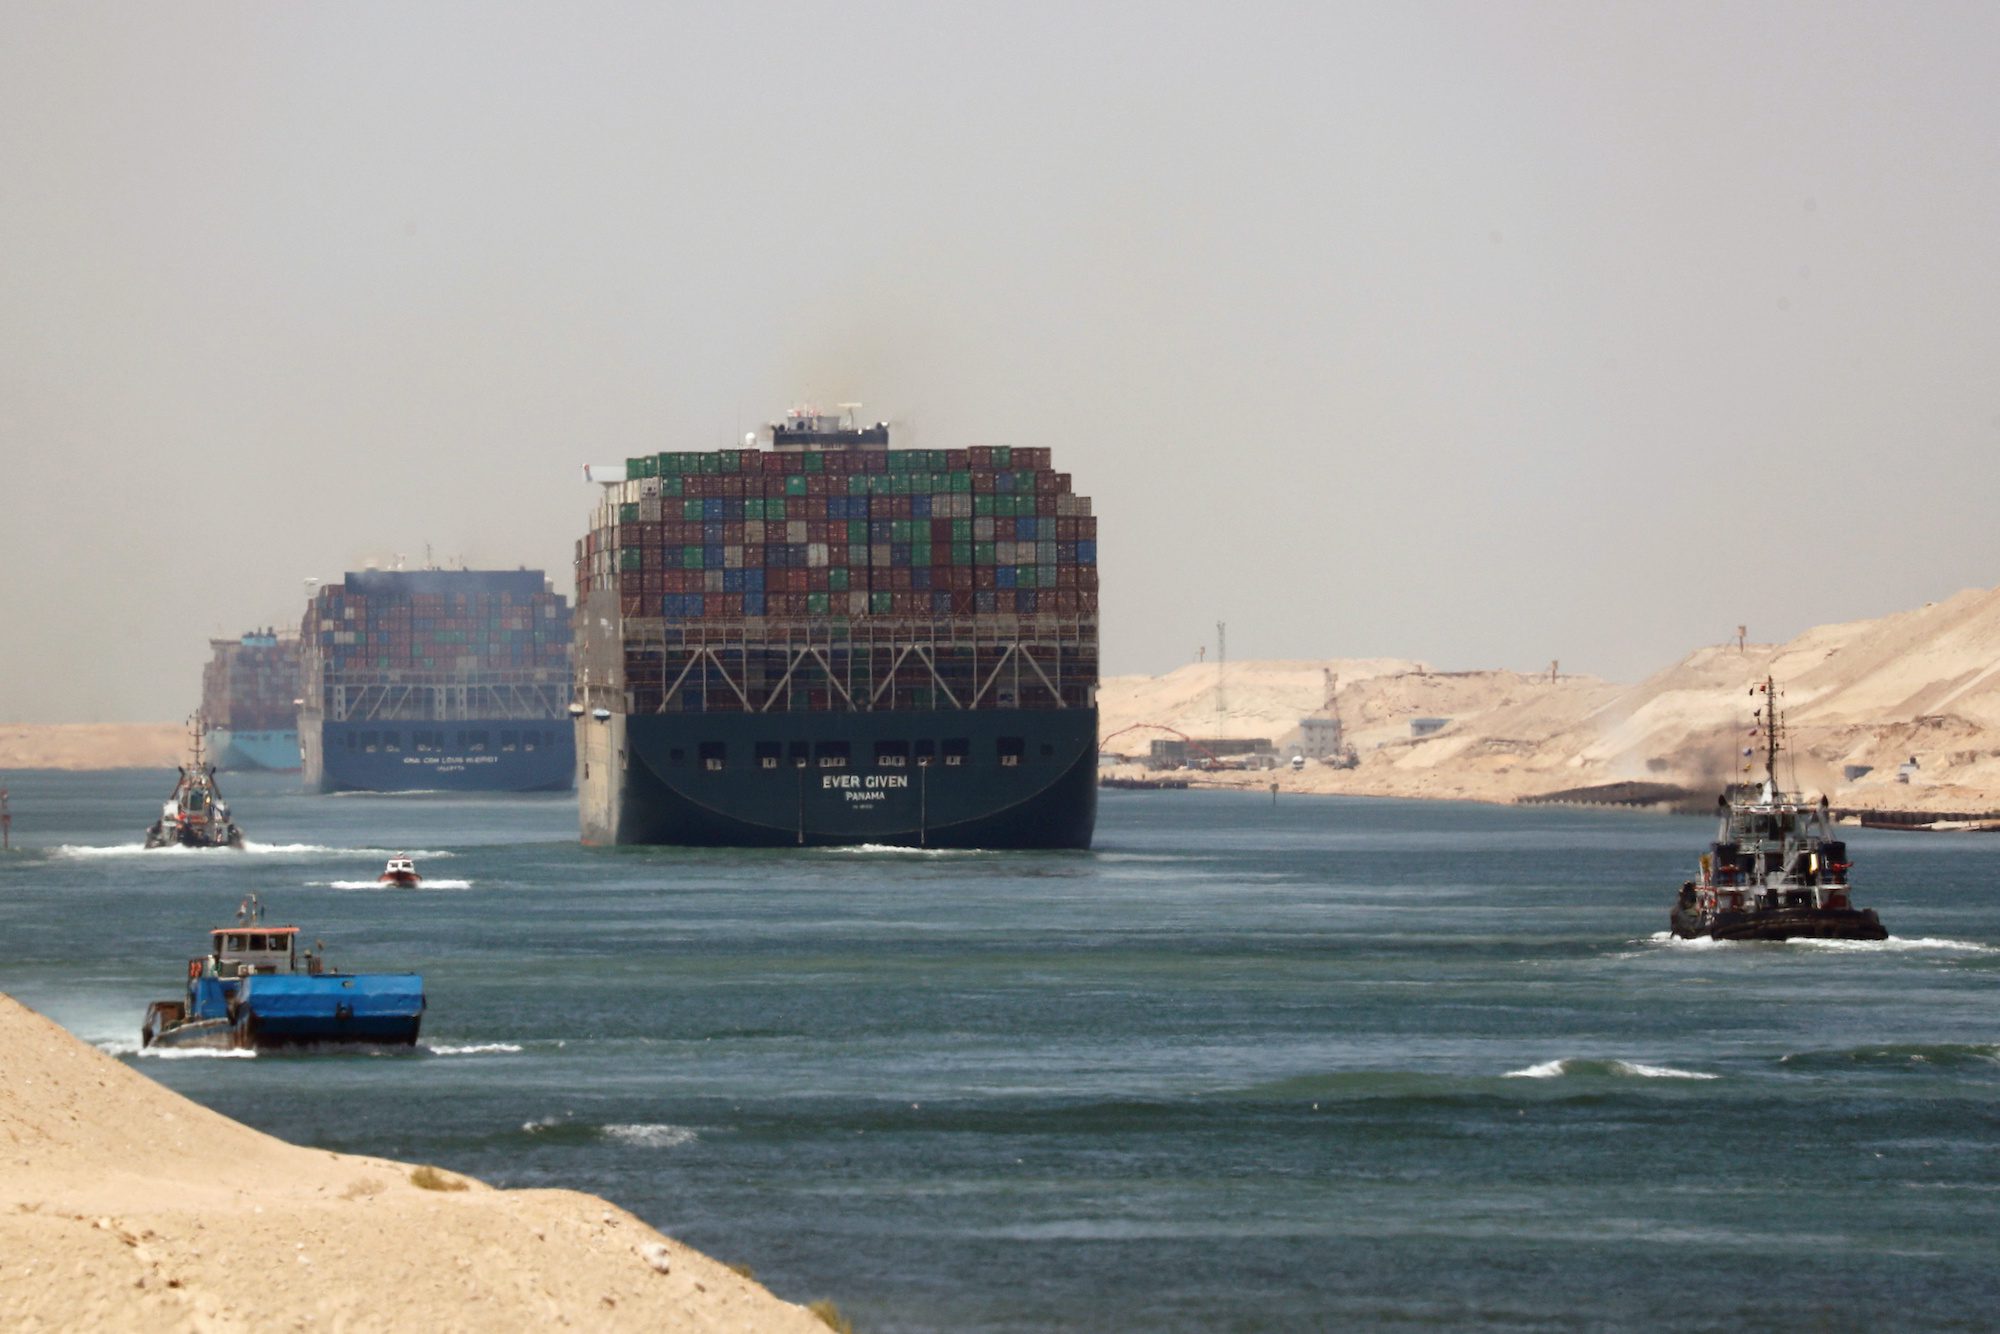 Egypt’s canal revenue drops 23.4% due to Red Sea attacks